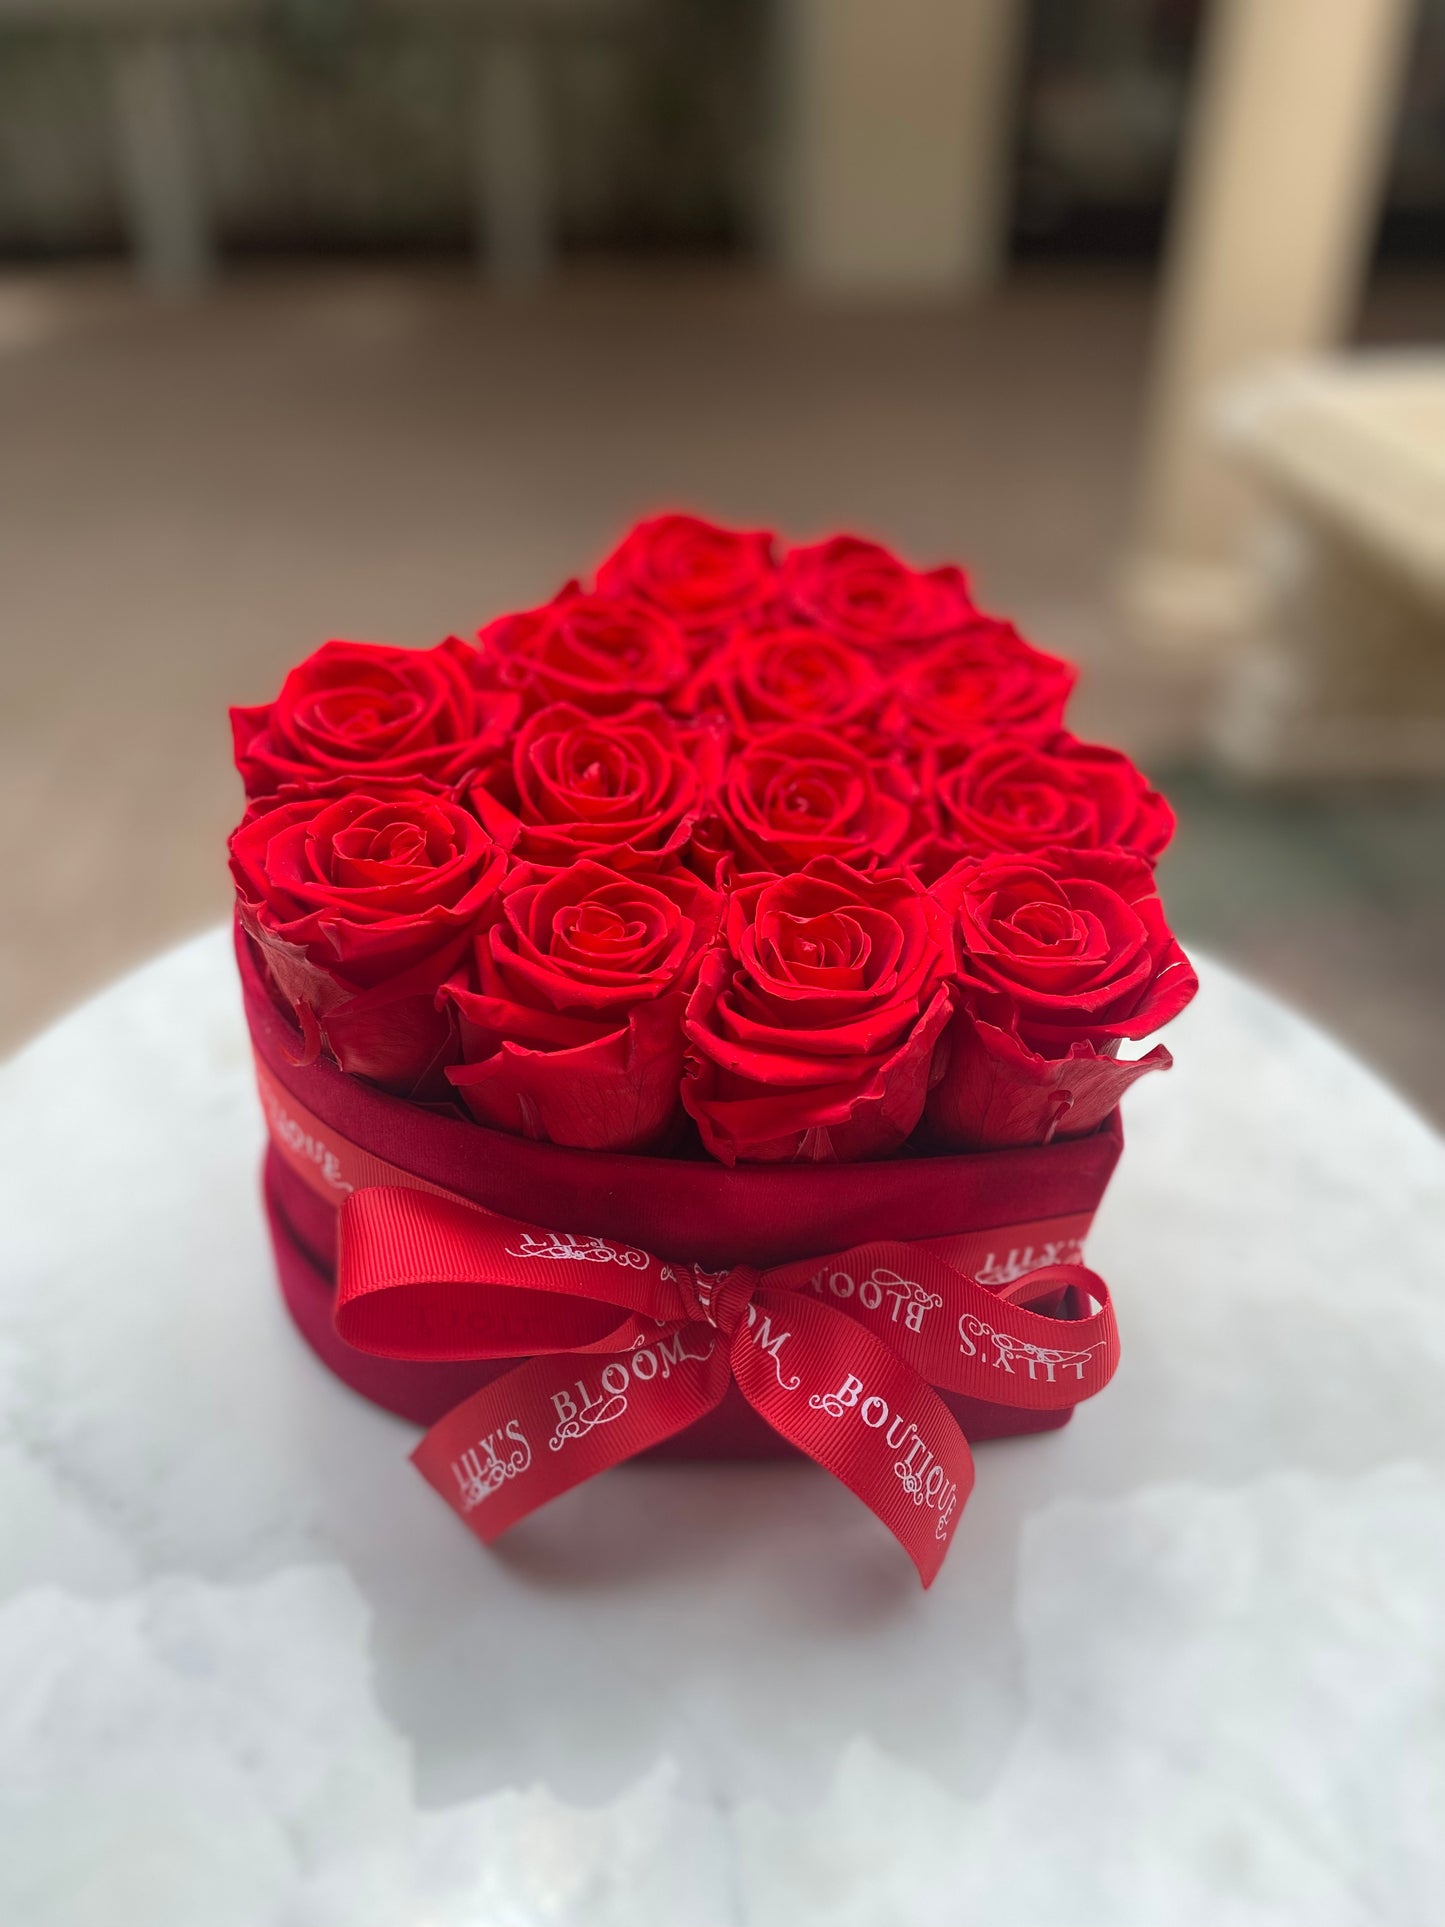 Red Roses with box with red Ribbon on a table